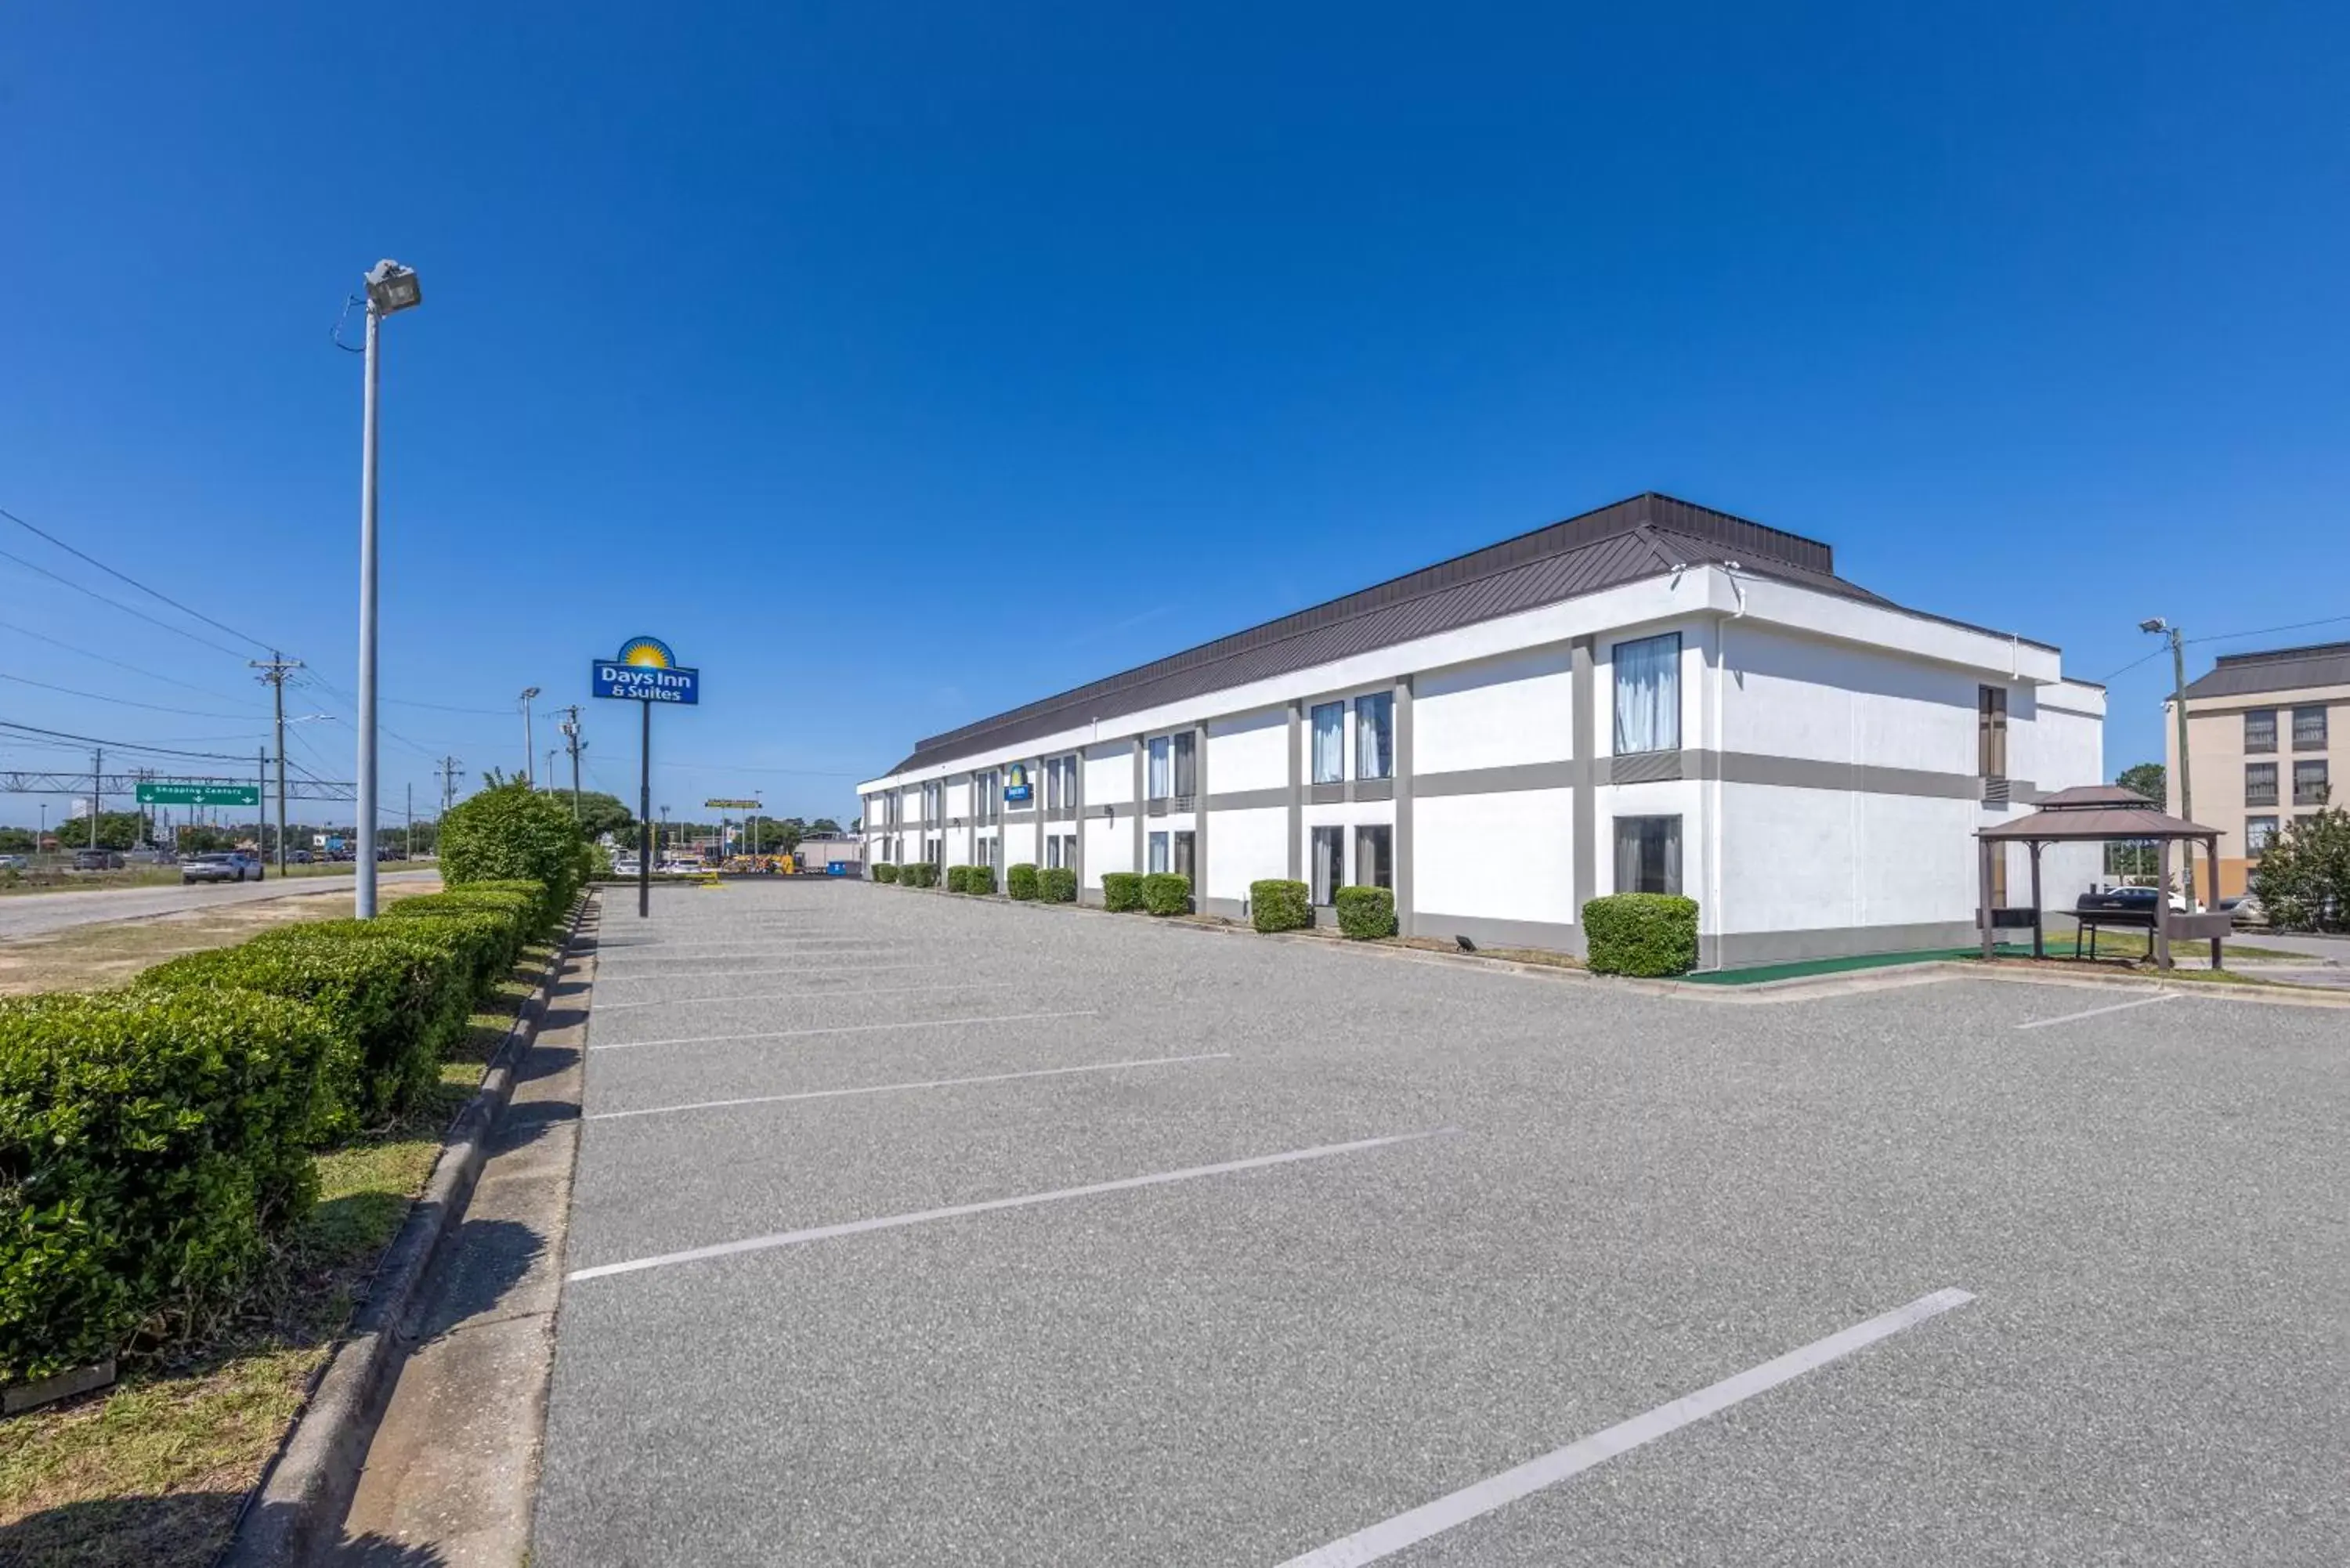 Property Building in Days Inn & Suites by Wyndham Fort Bragg/Cross Creek Mall